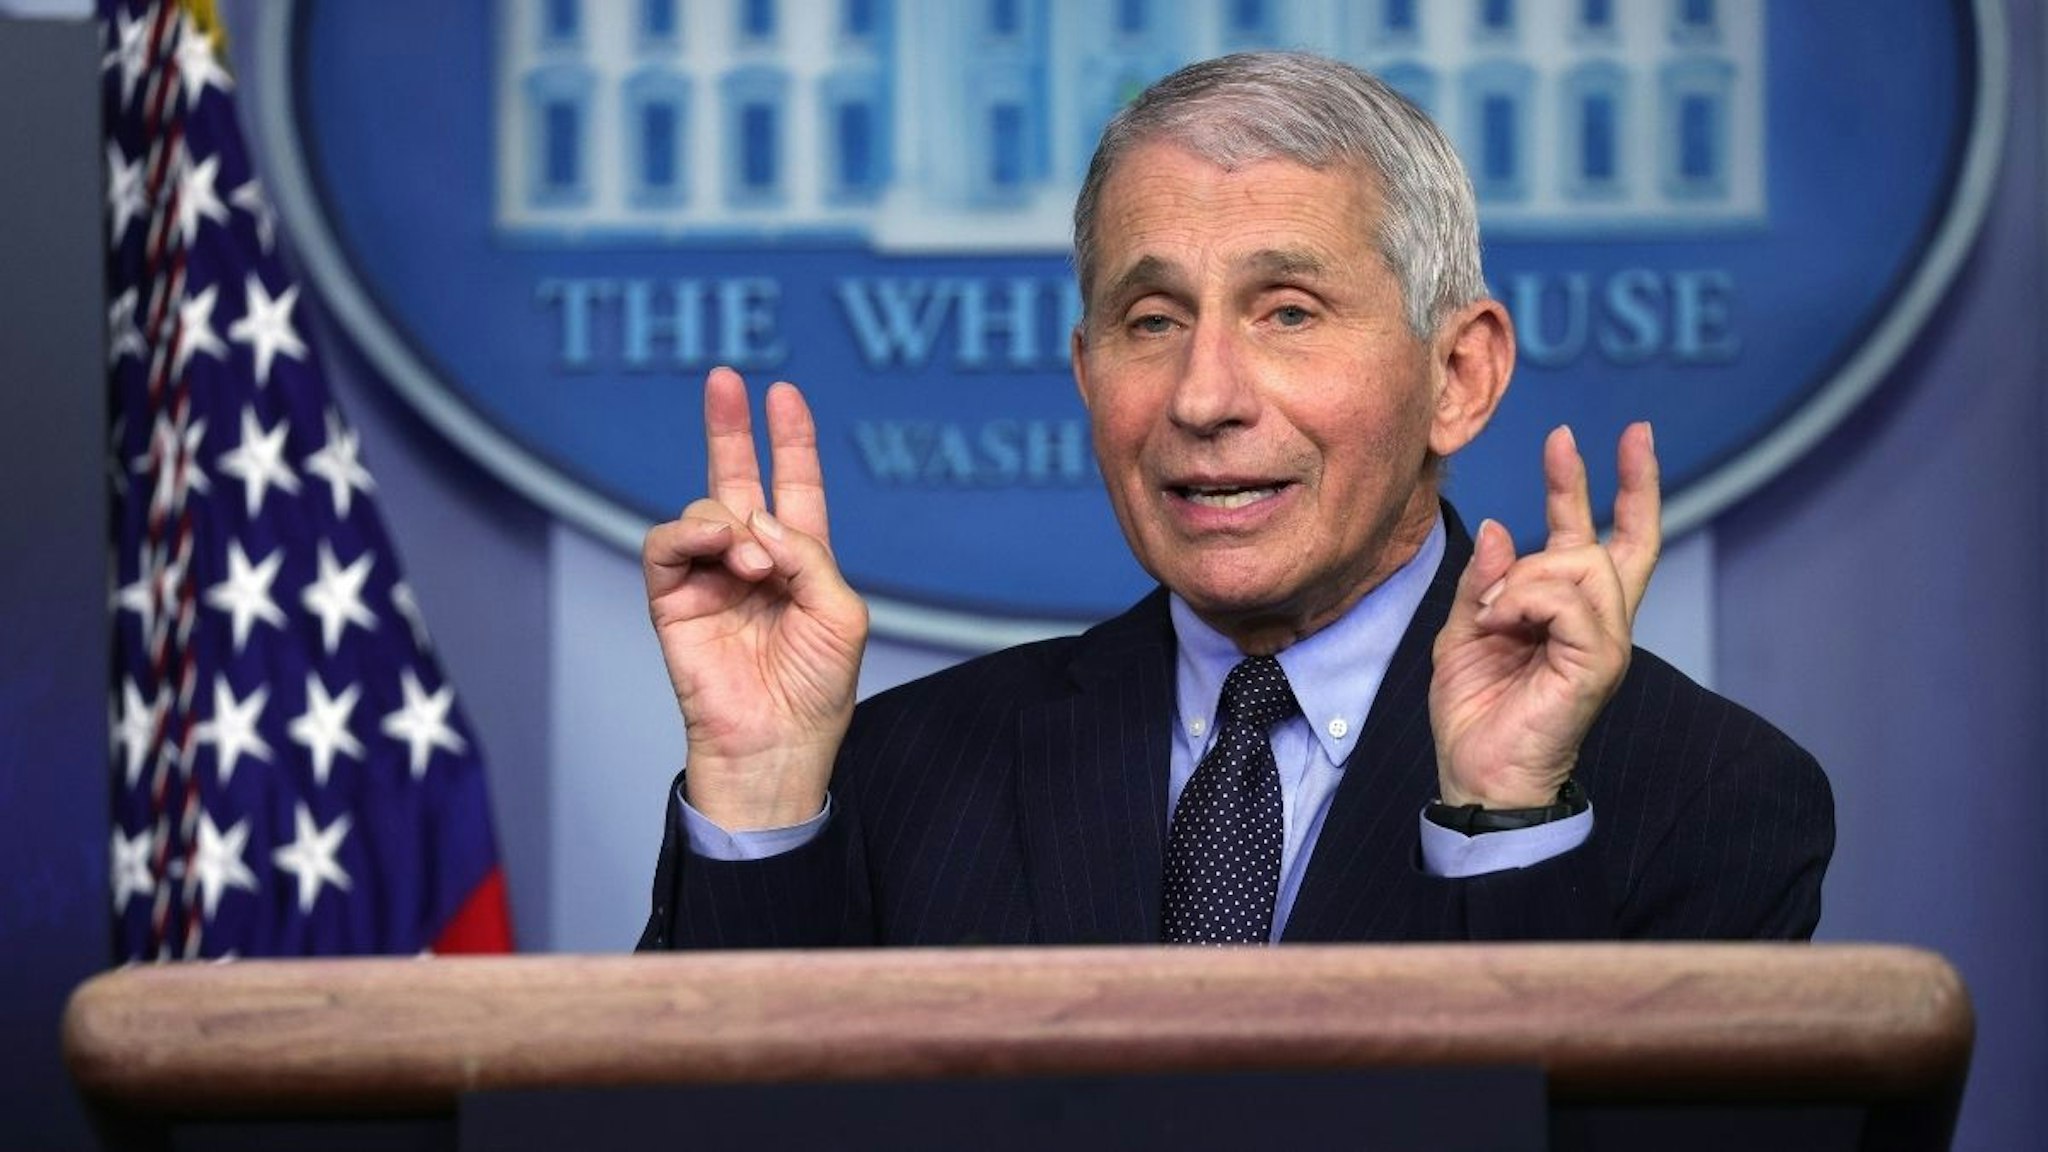 Dr Anthony Fauci, Director of the National Institute of Allergy and Infectious Diseases, speaks during a White House press briefing, conducted by White House Press Secretary Jen Psaki, at the James Brady Press Briefing Room of the White House January 21, 2021 in Washington, DC. Psaki held her second press briefing since President